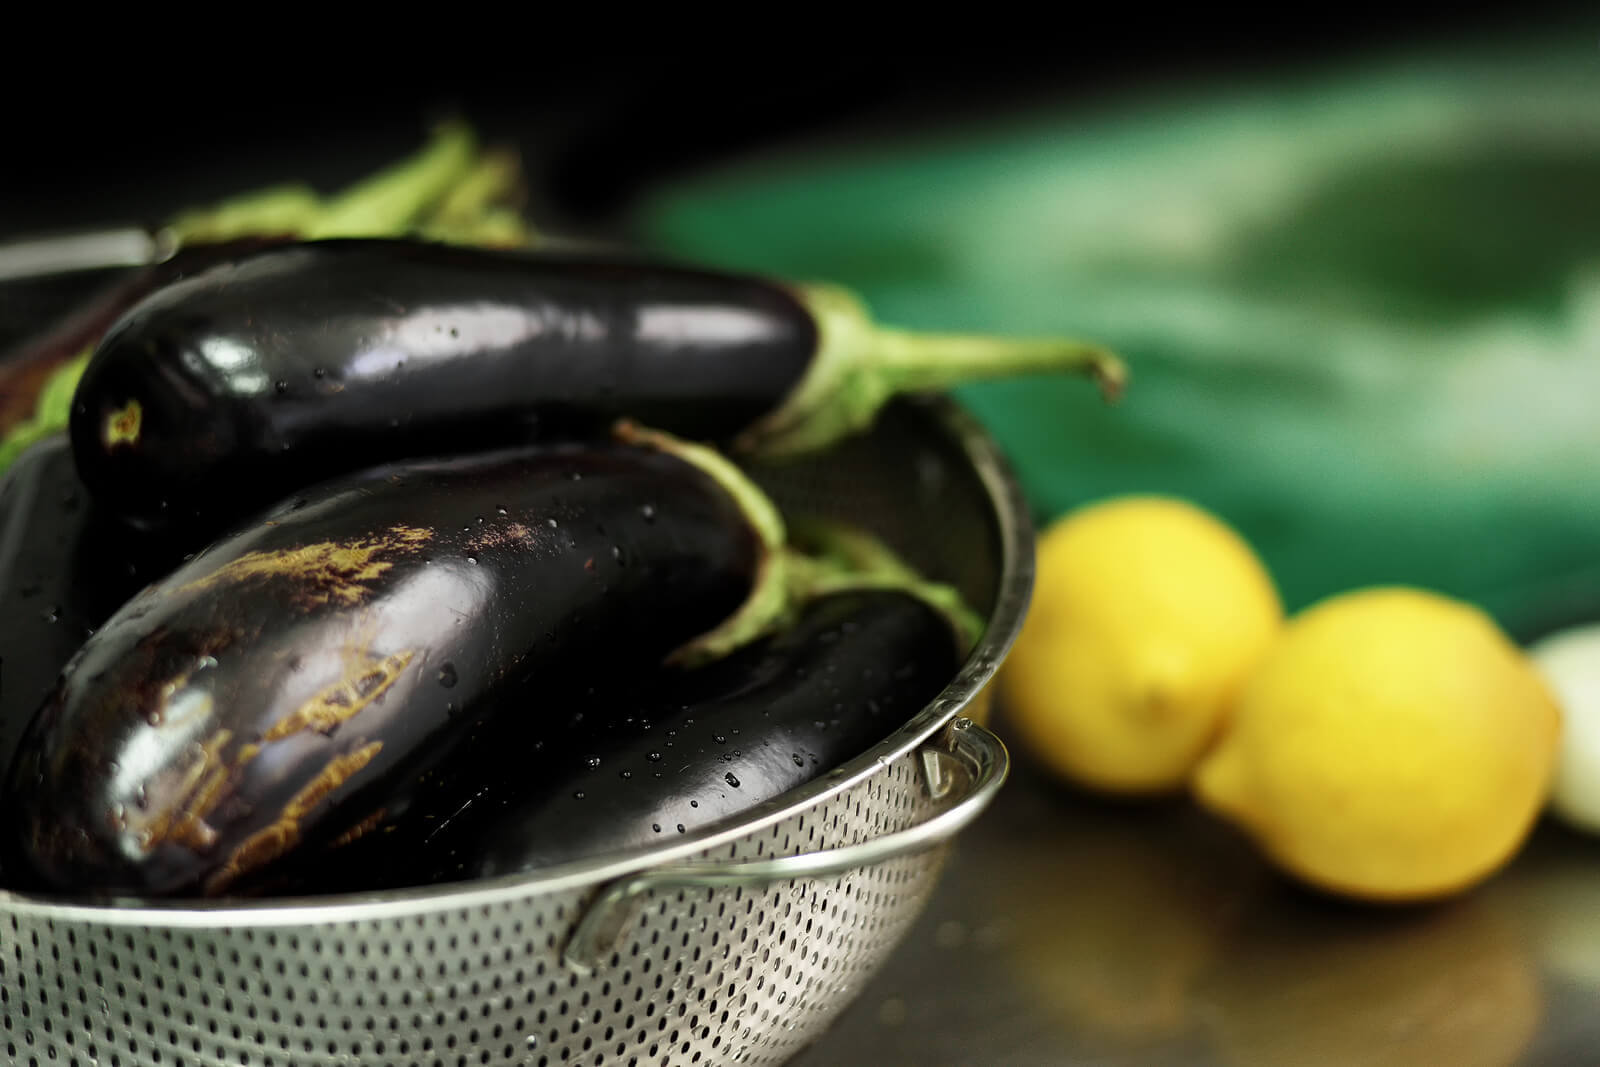 Whole eggplants in a strainer, with whole lemons in the background.